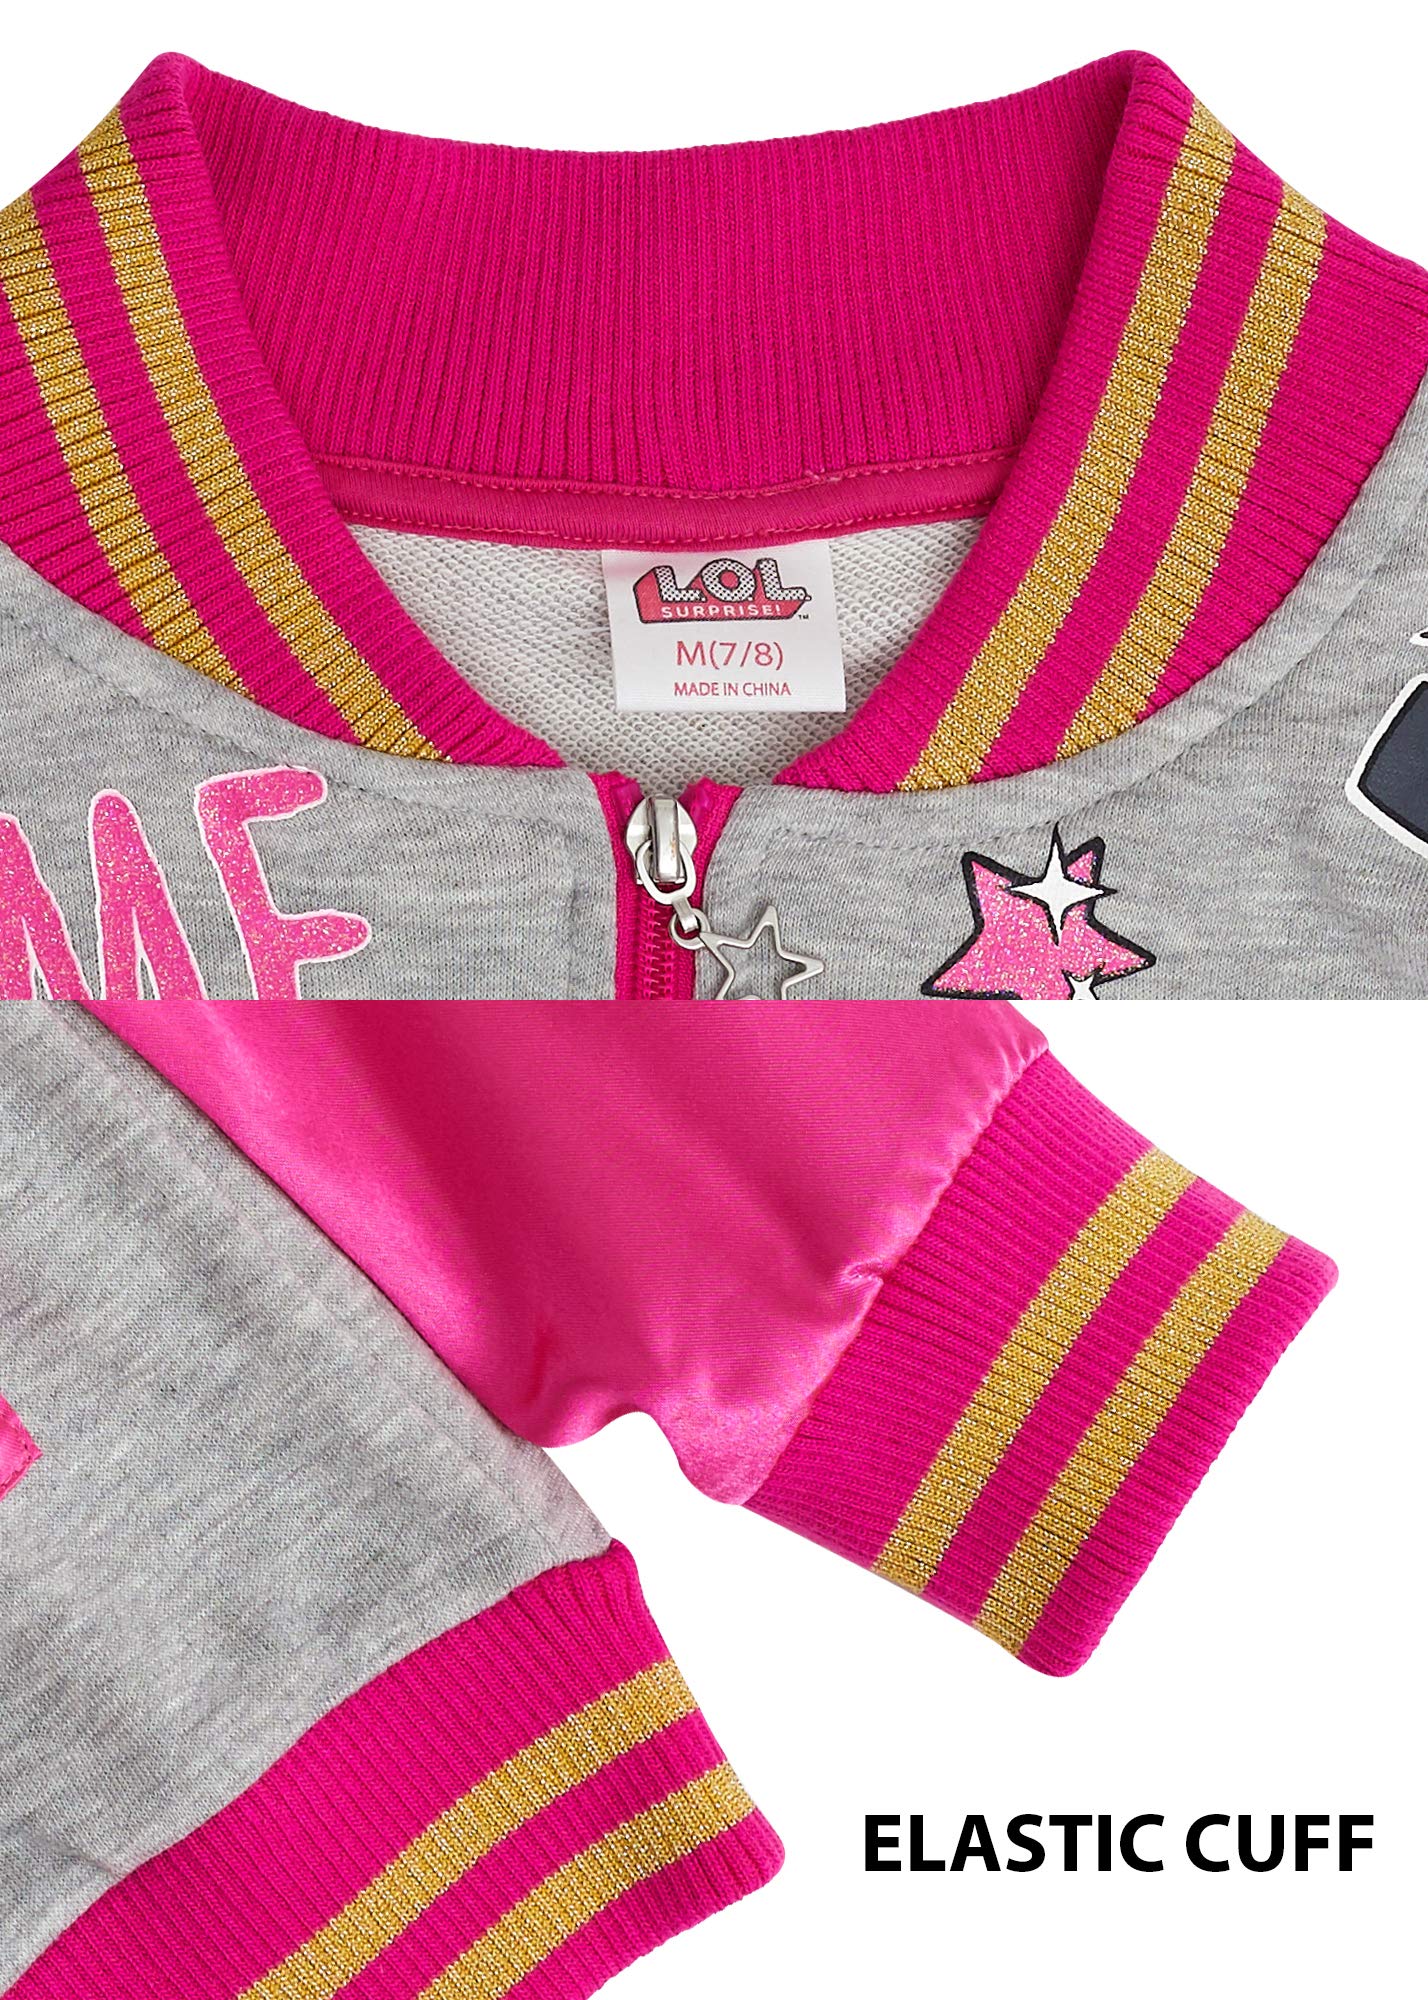 L.O.L. Surprise! Girls' Bomber Pink Sparkly Sleeve 'Time to Shine' Sequin Jacket